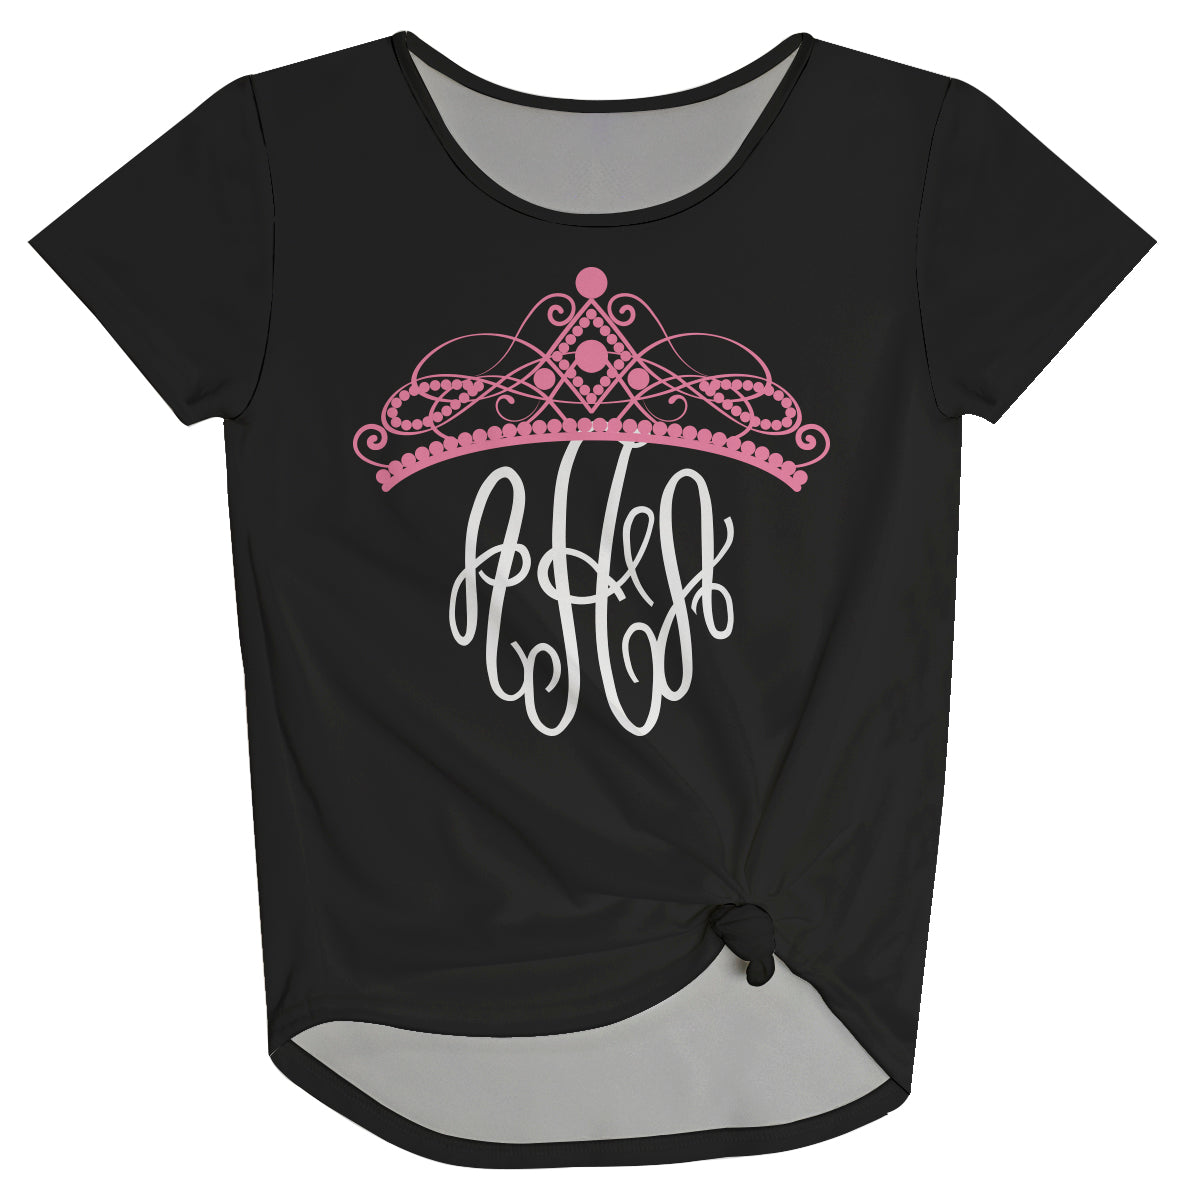 Crown and Personalized  Monogram Black Knot Top - Wimziy&Co.